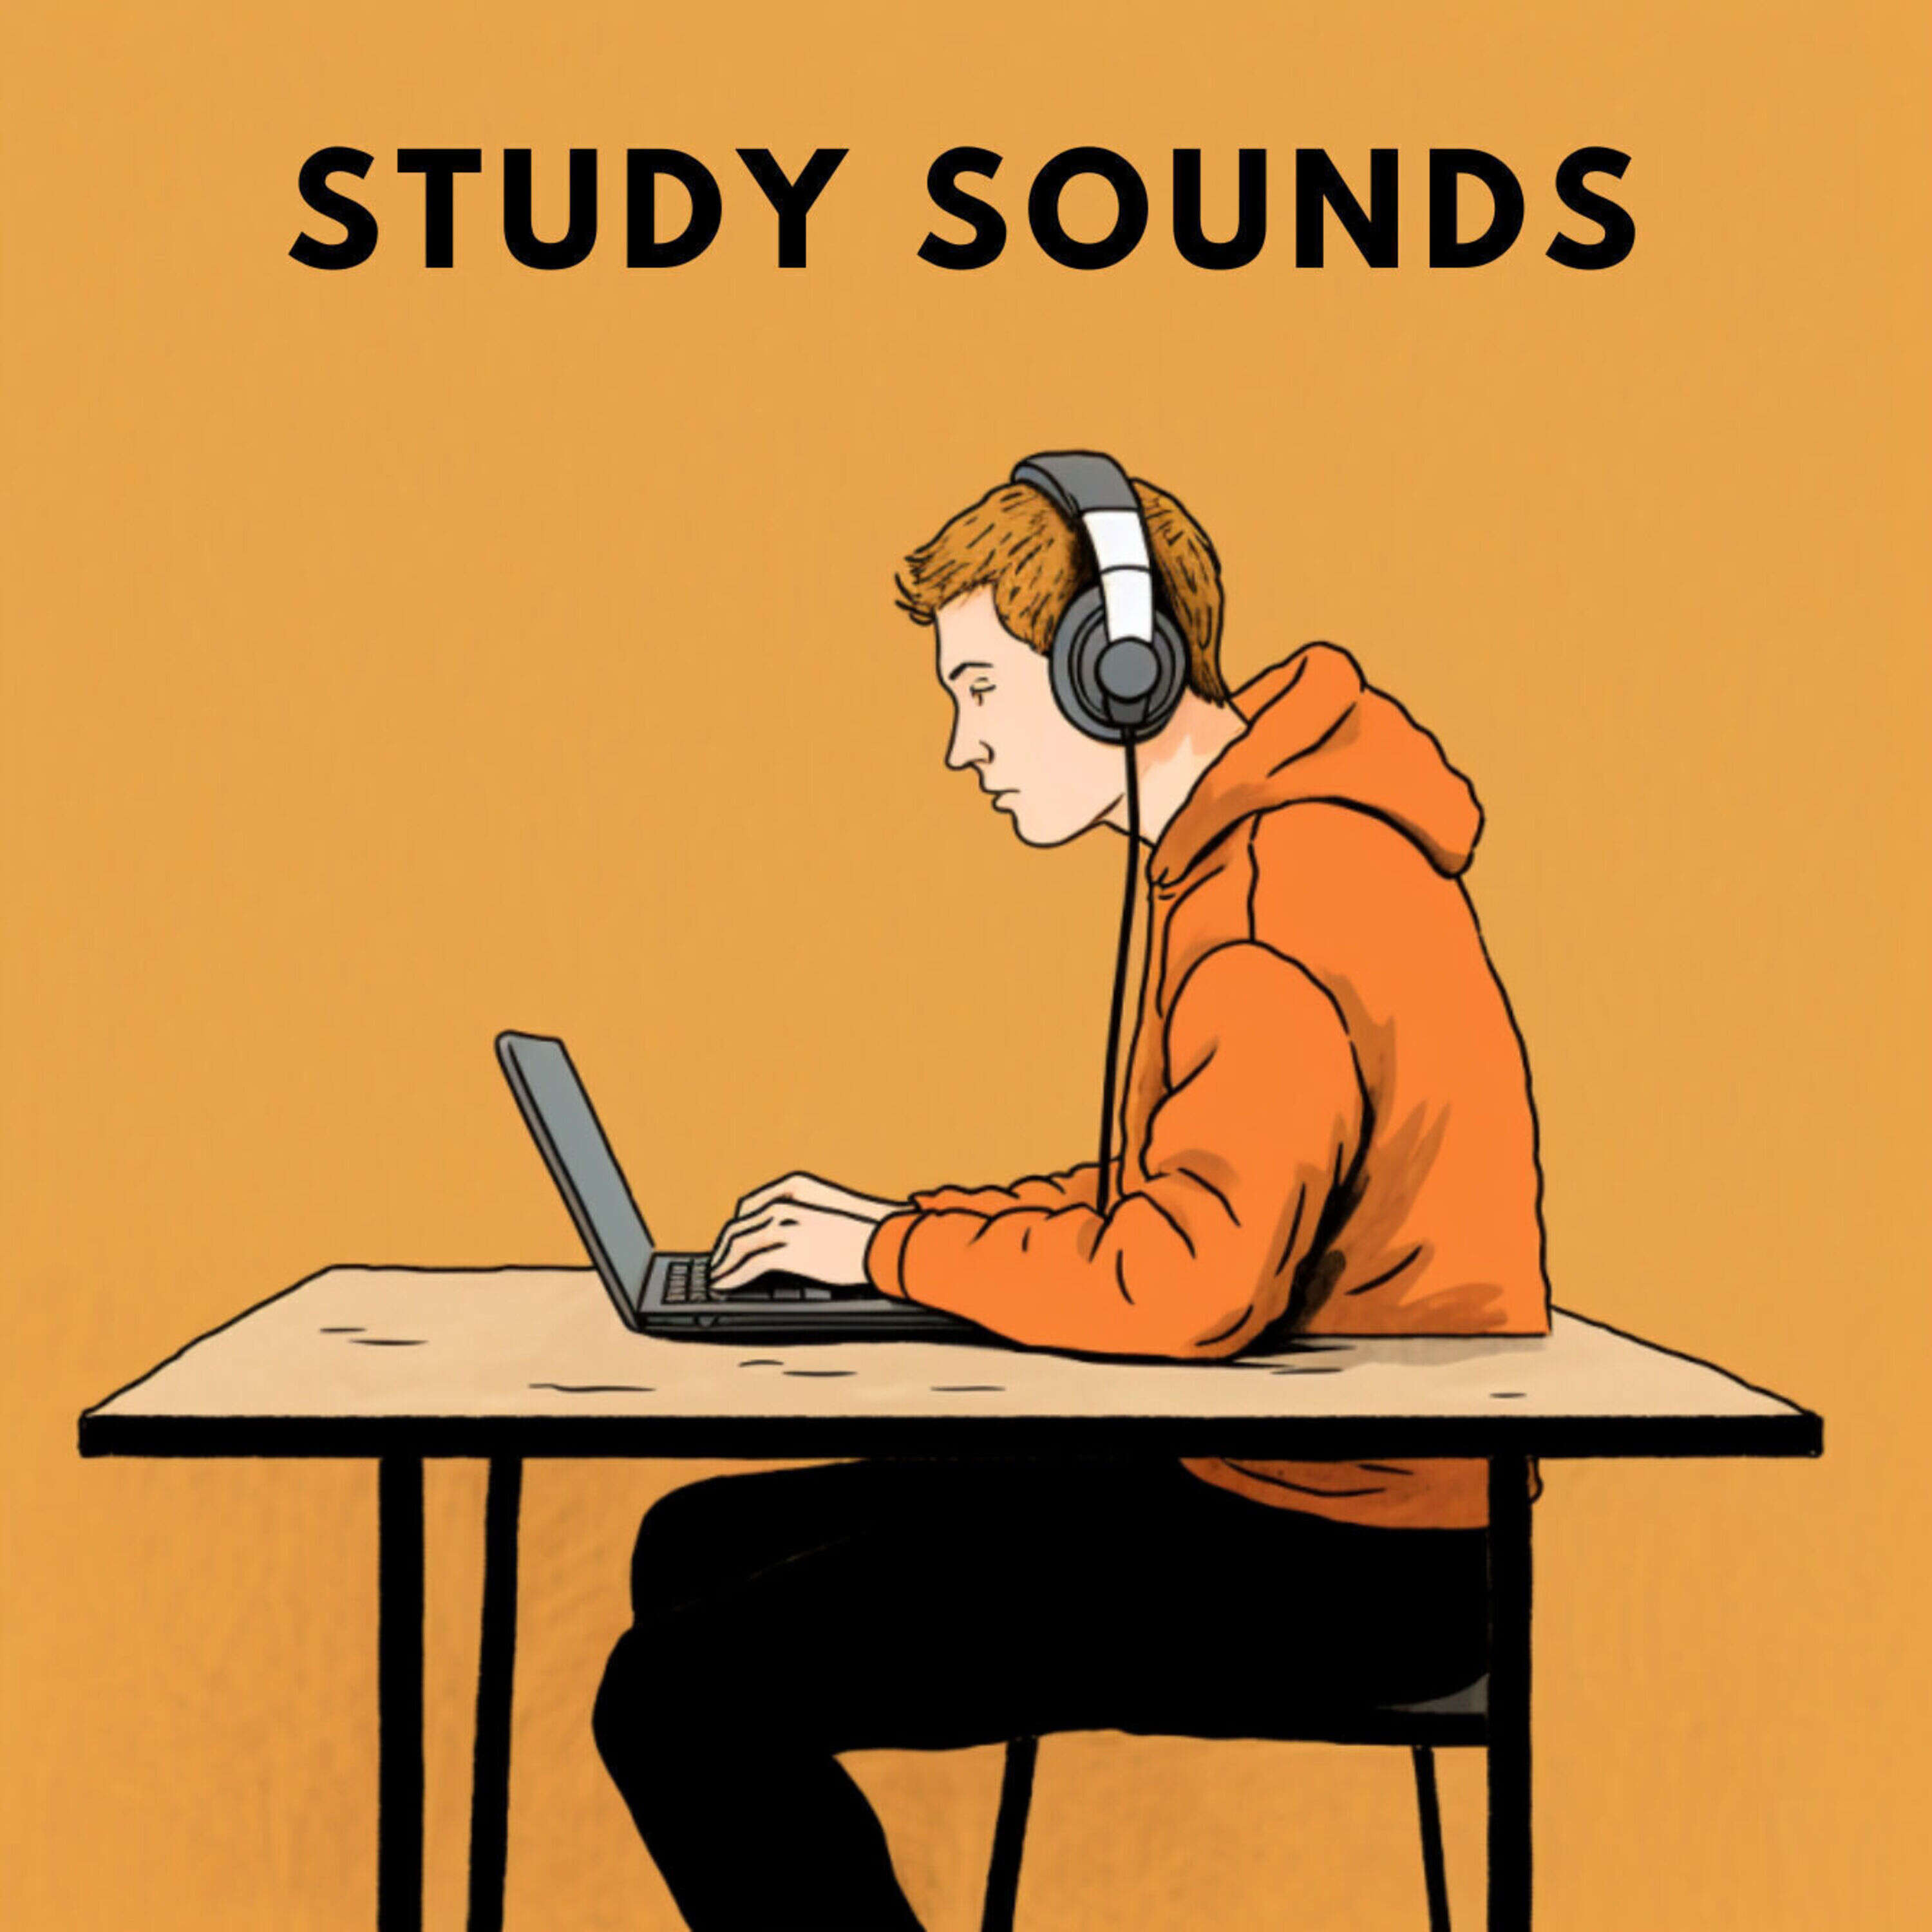 ADHD Relief sounds: Deep Focus soundsfor Studying and Concentration, Study sounds